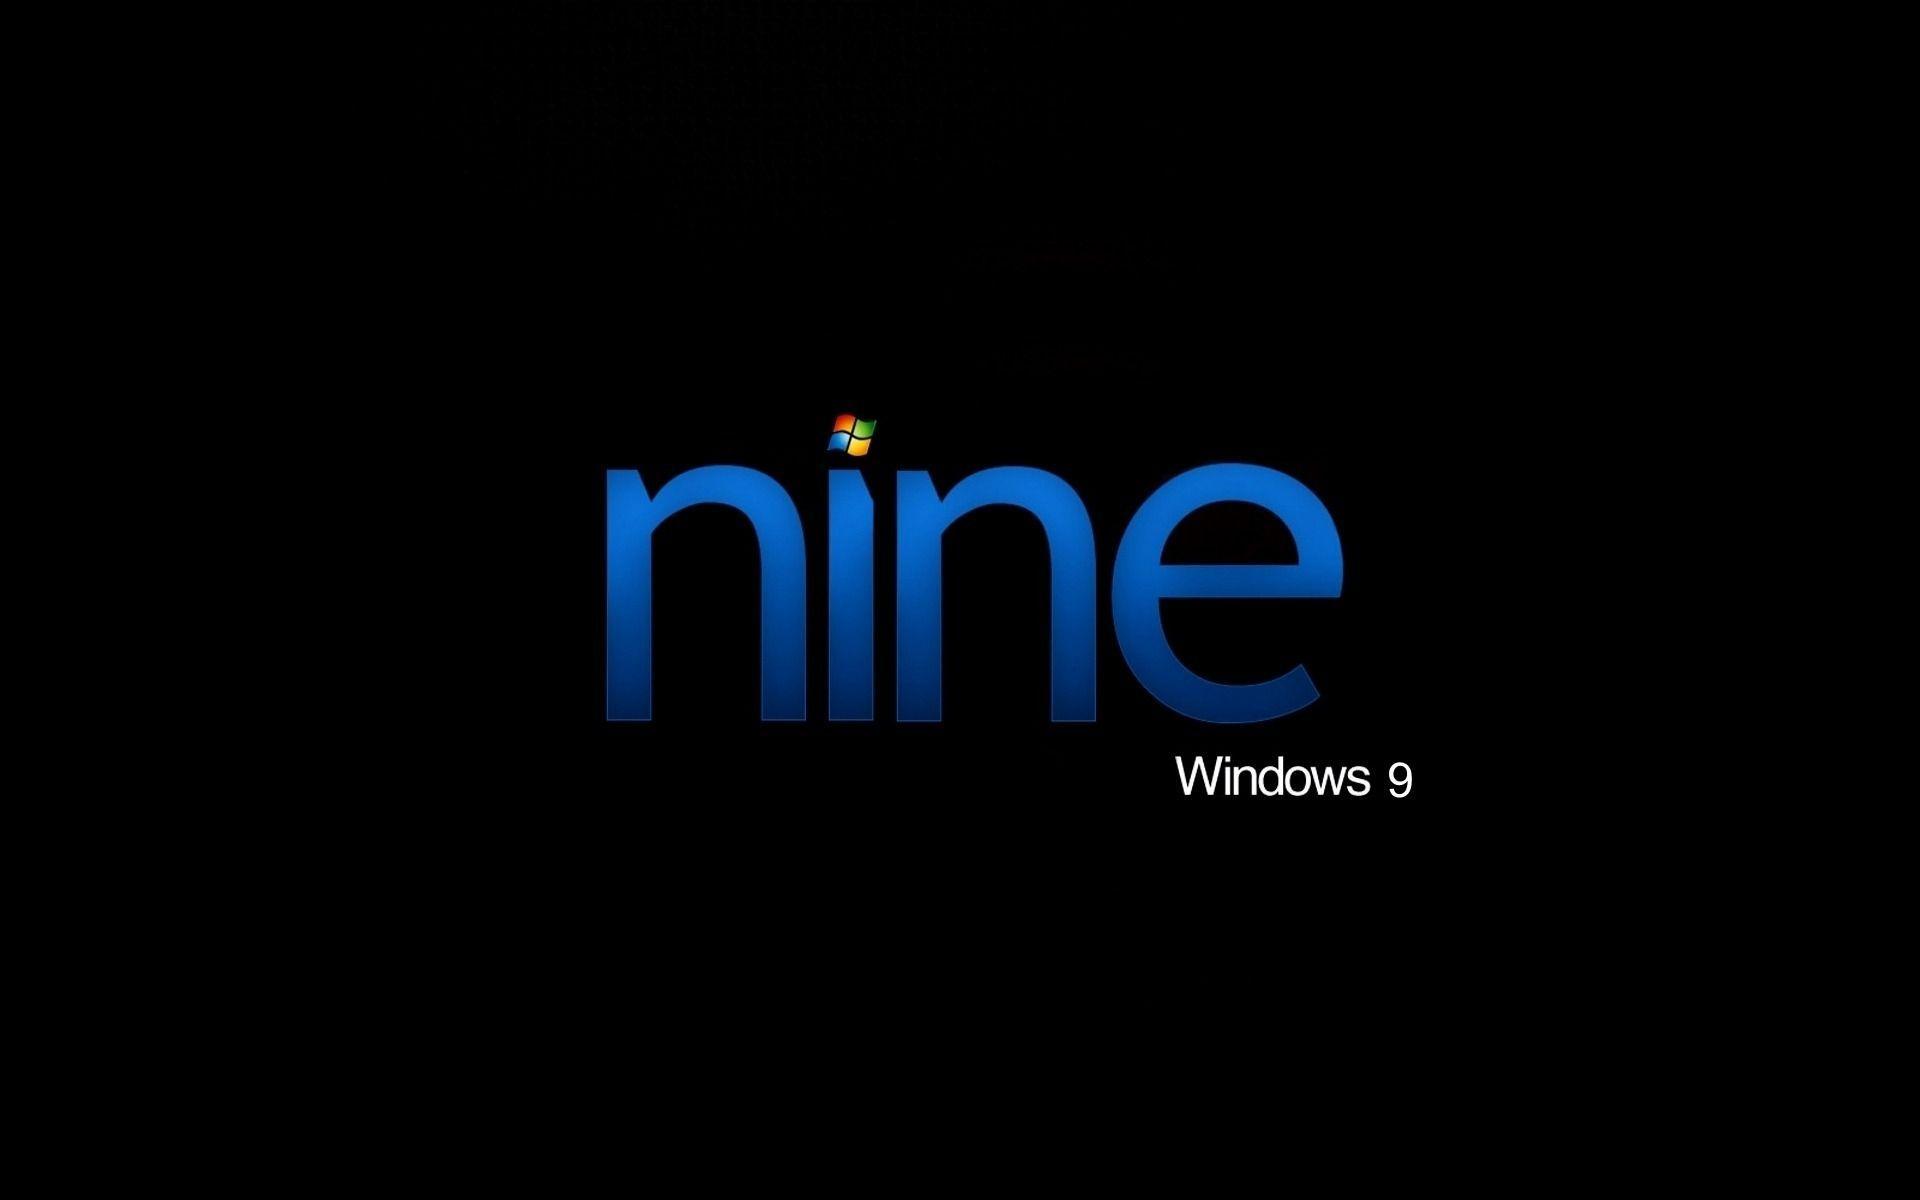 Windows 9 nine wallpaper and image, picture, photo